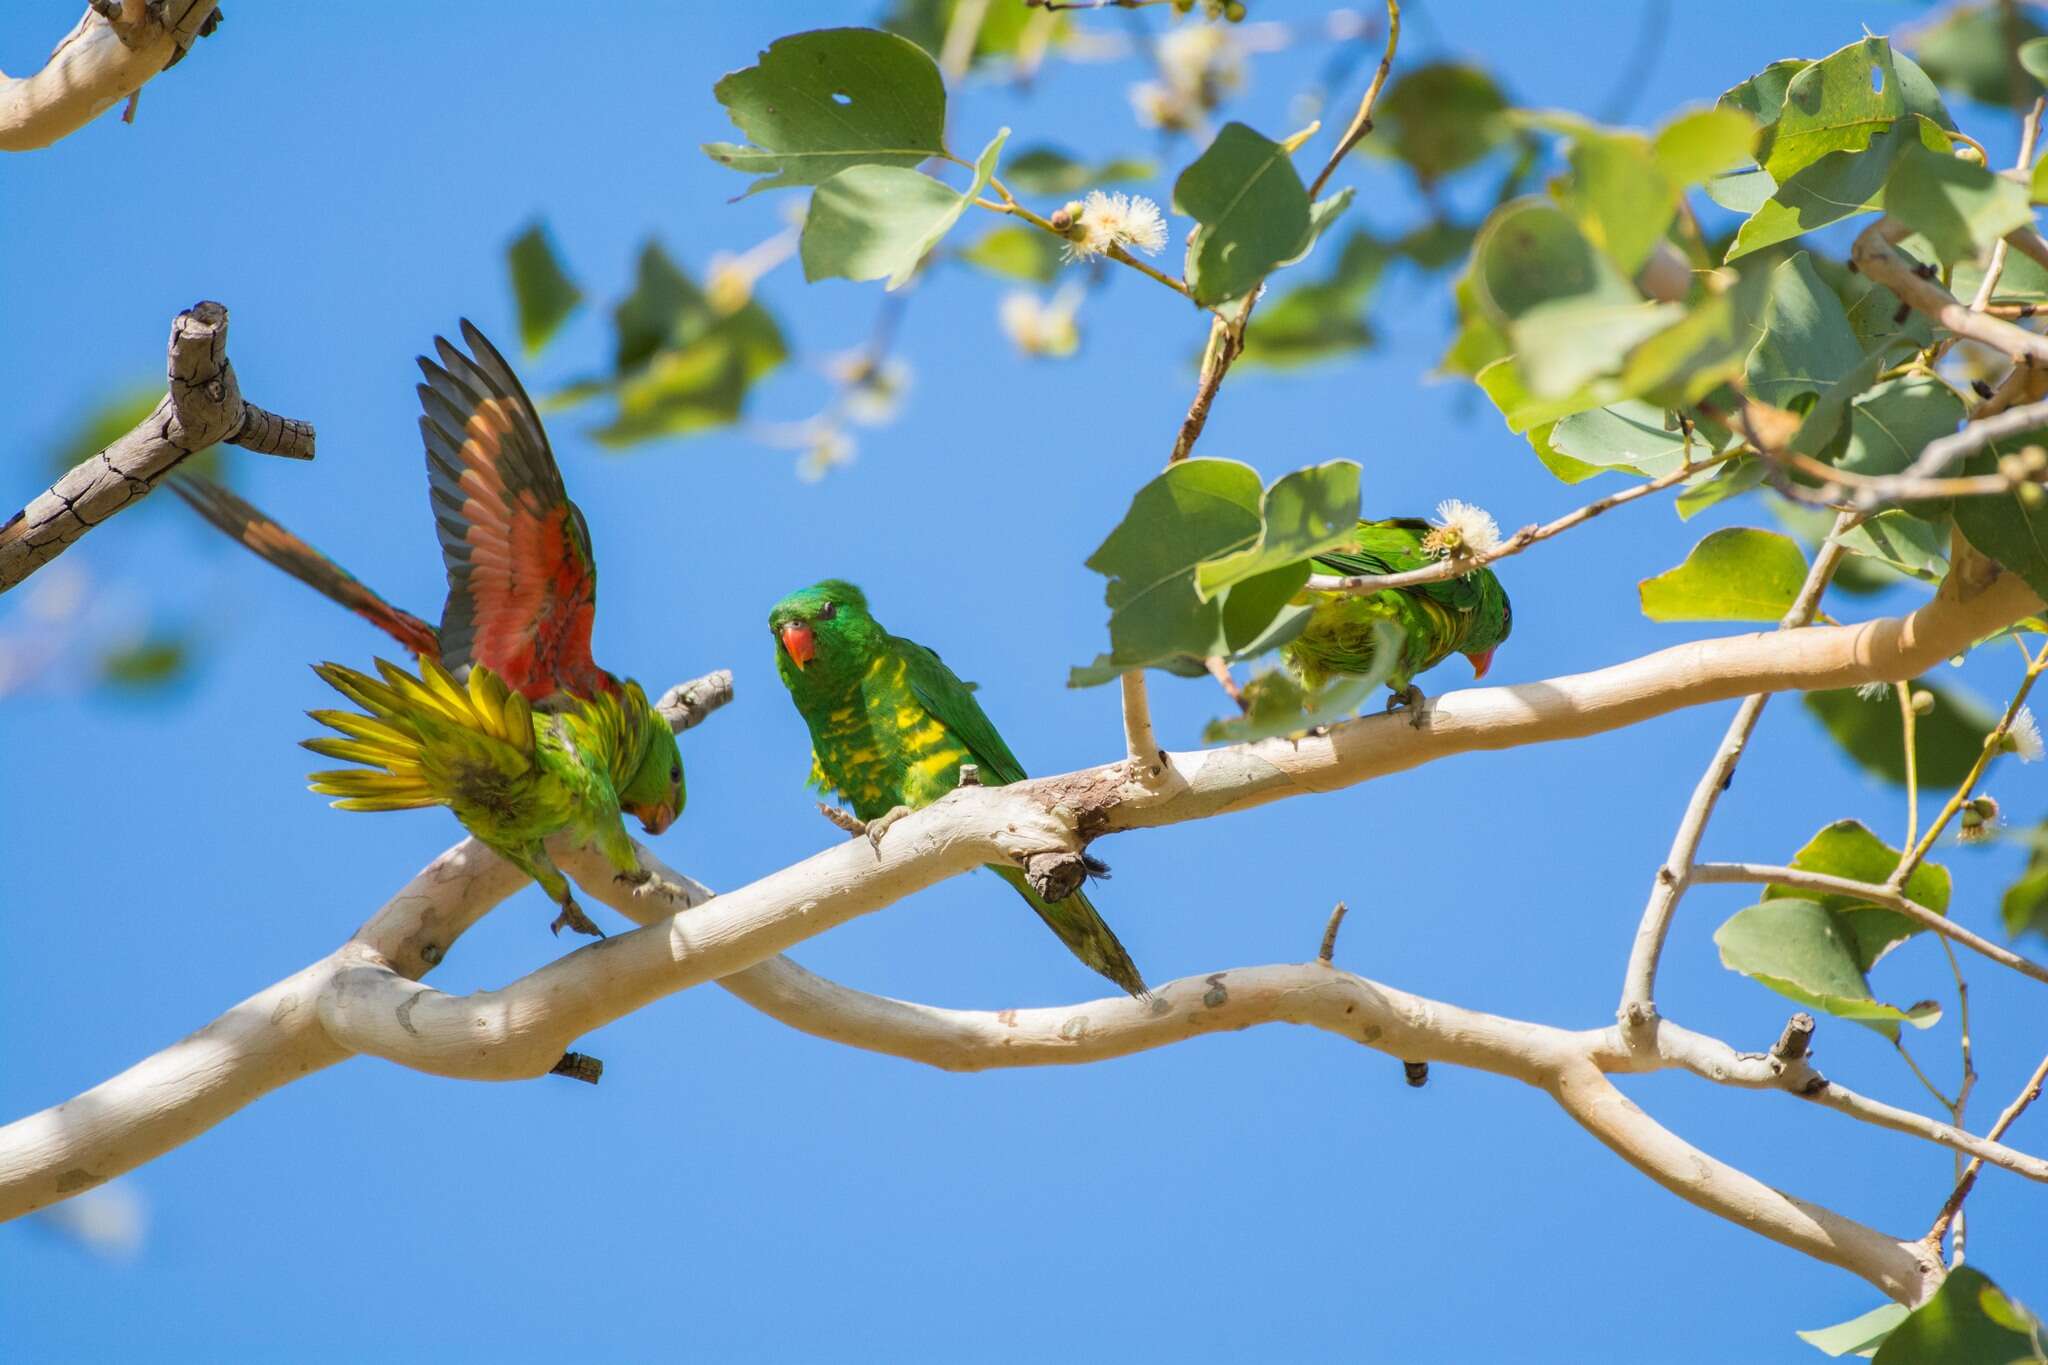 Image of Scaly-breasted Lorikeet